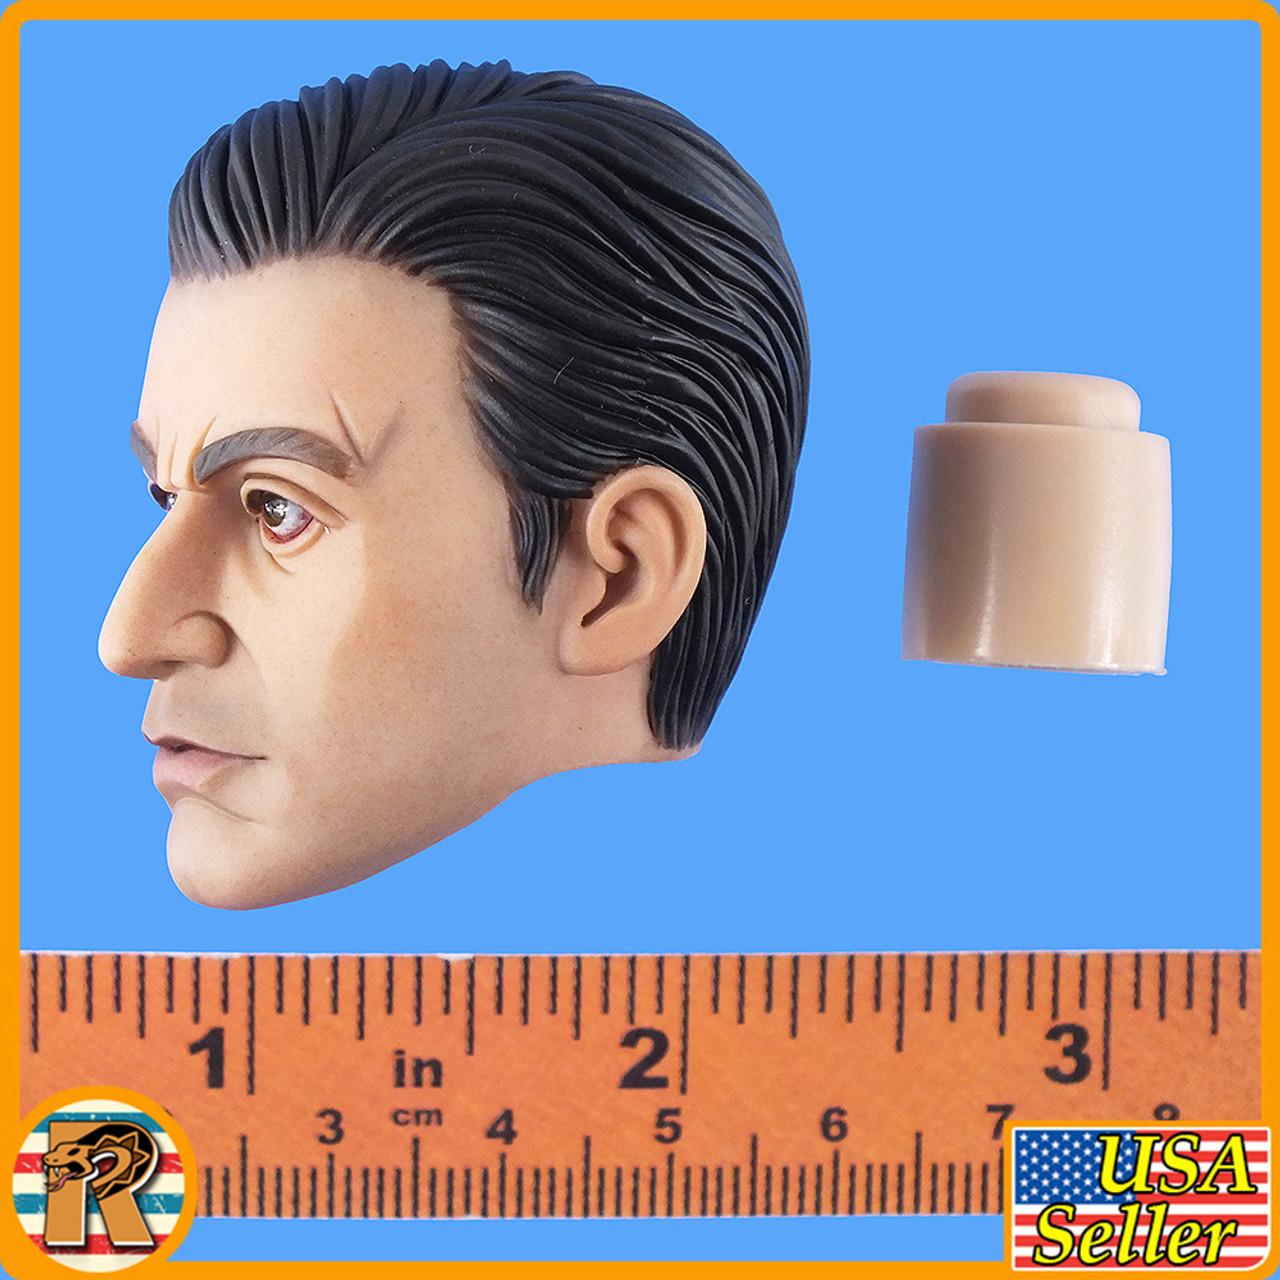 GK Diamond A Angelo - Serious Head w/ Joint #1 - 1/6 Scale -